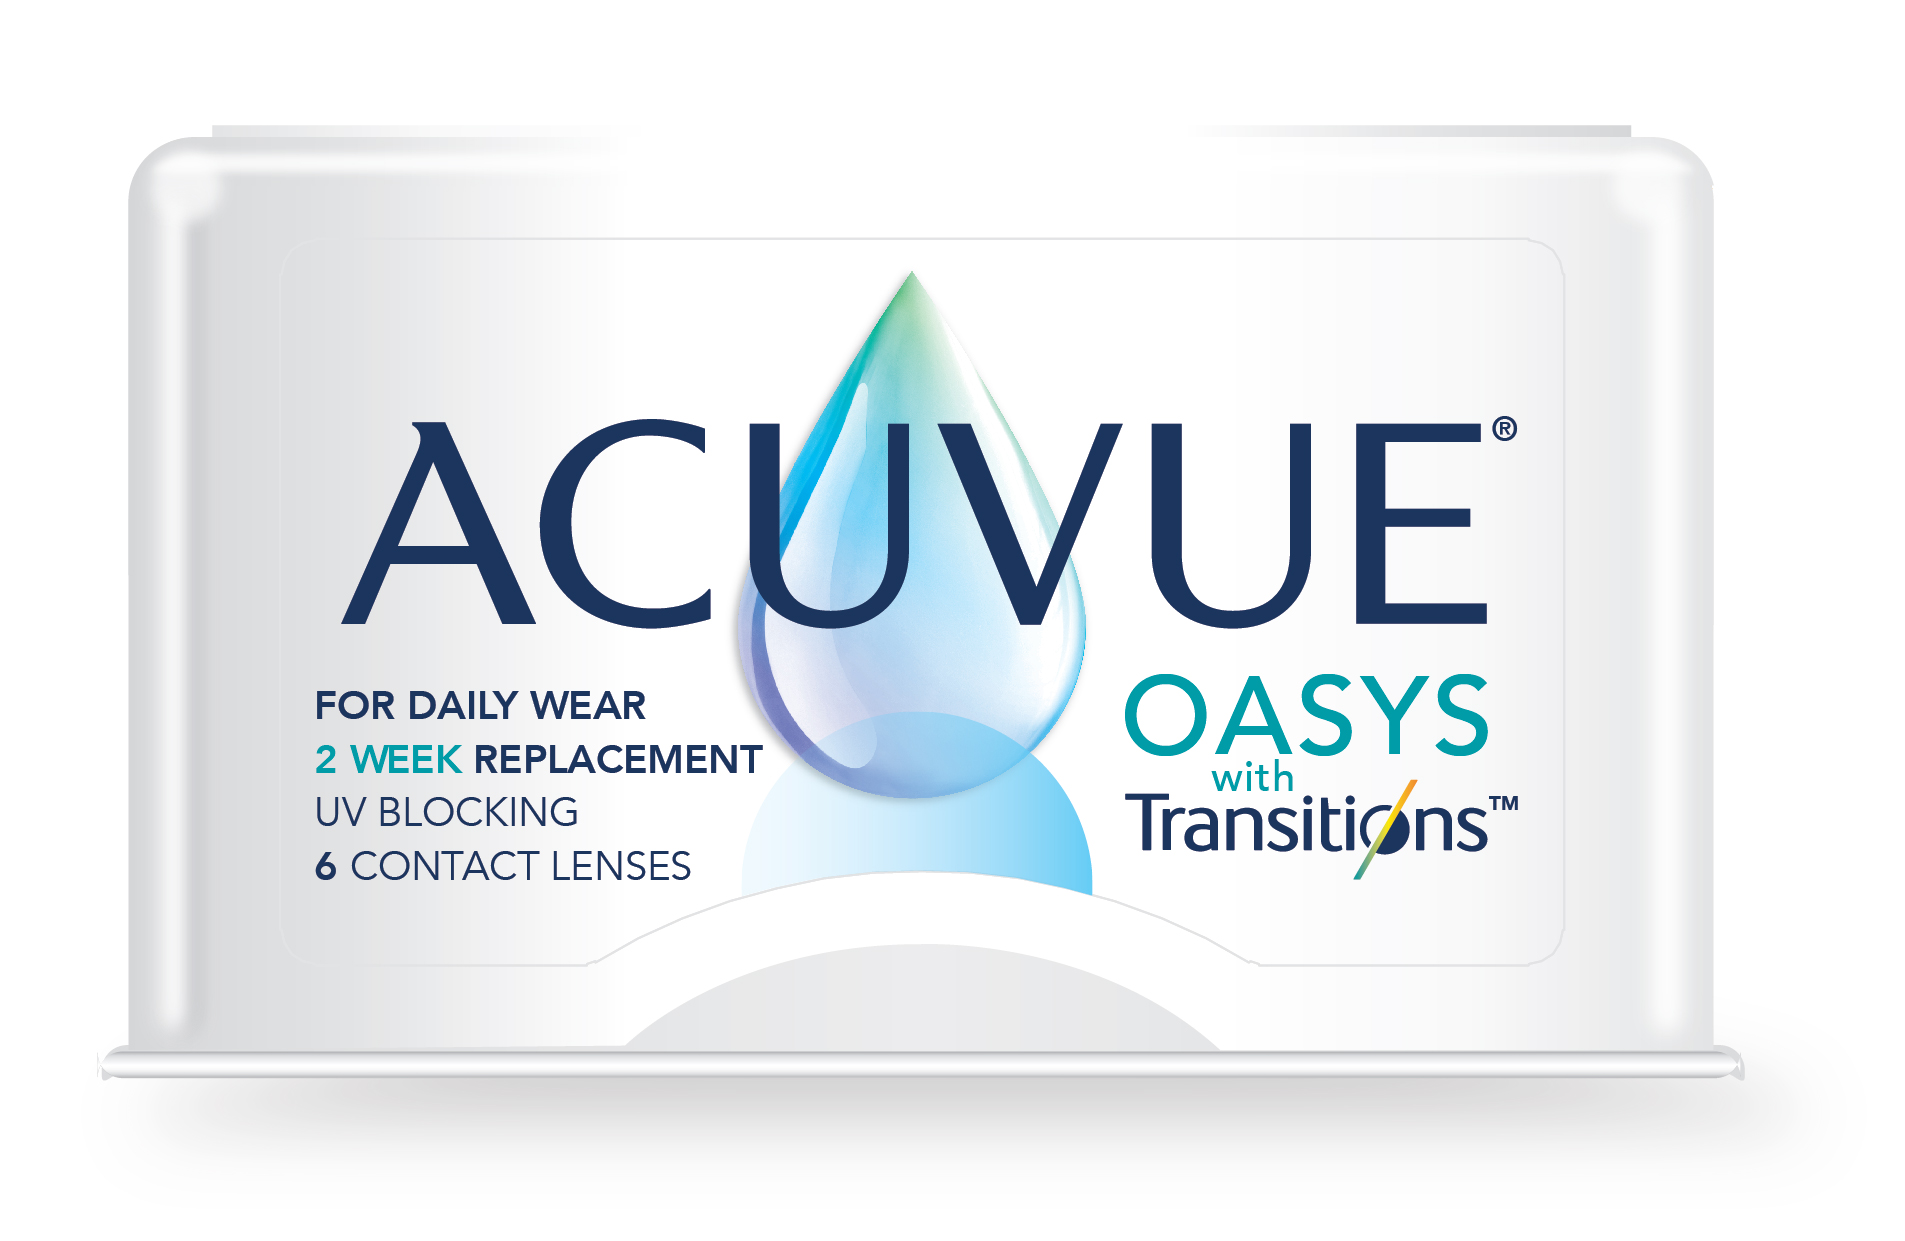 acuvue-oasys-with-transitions-light-intelligent-technology